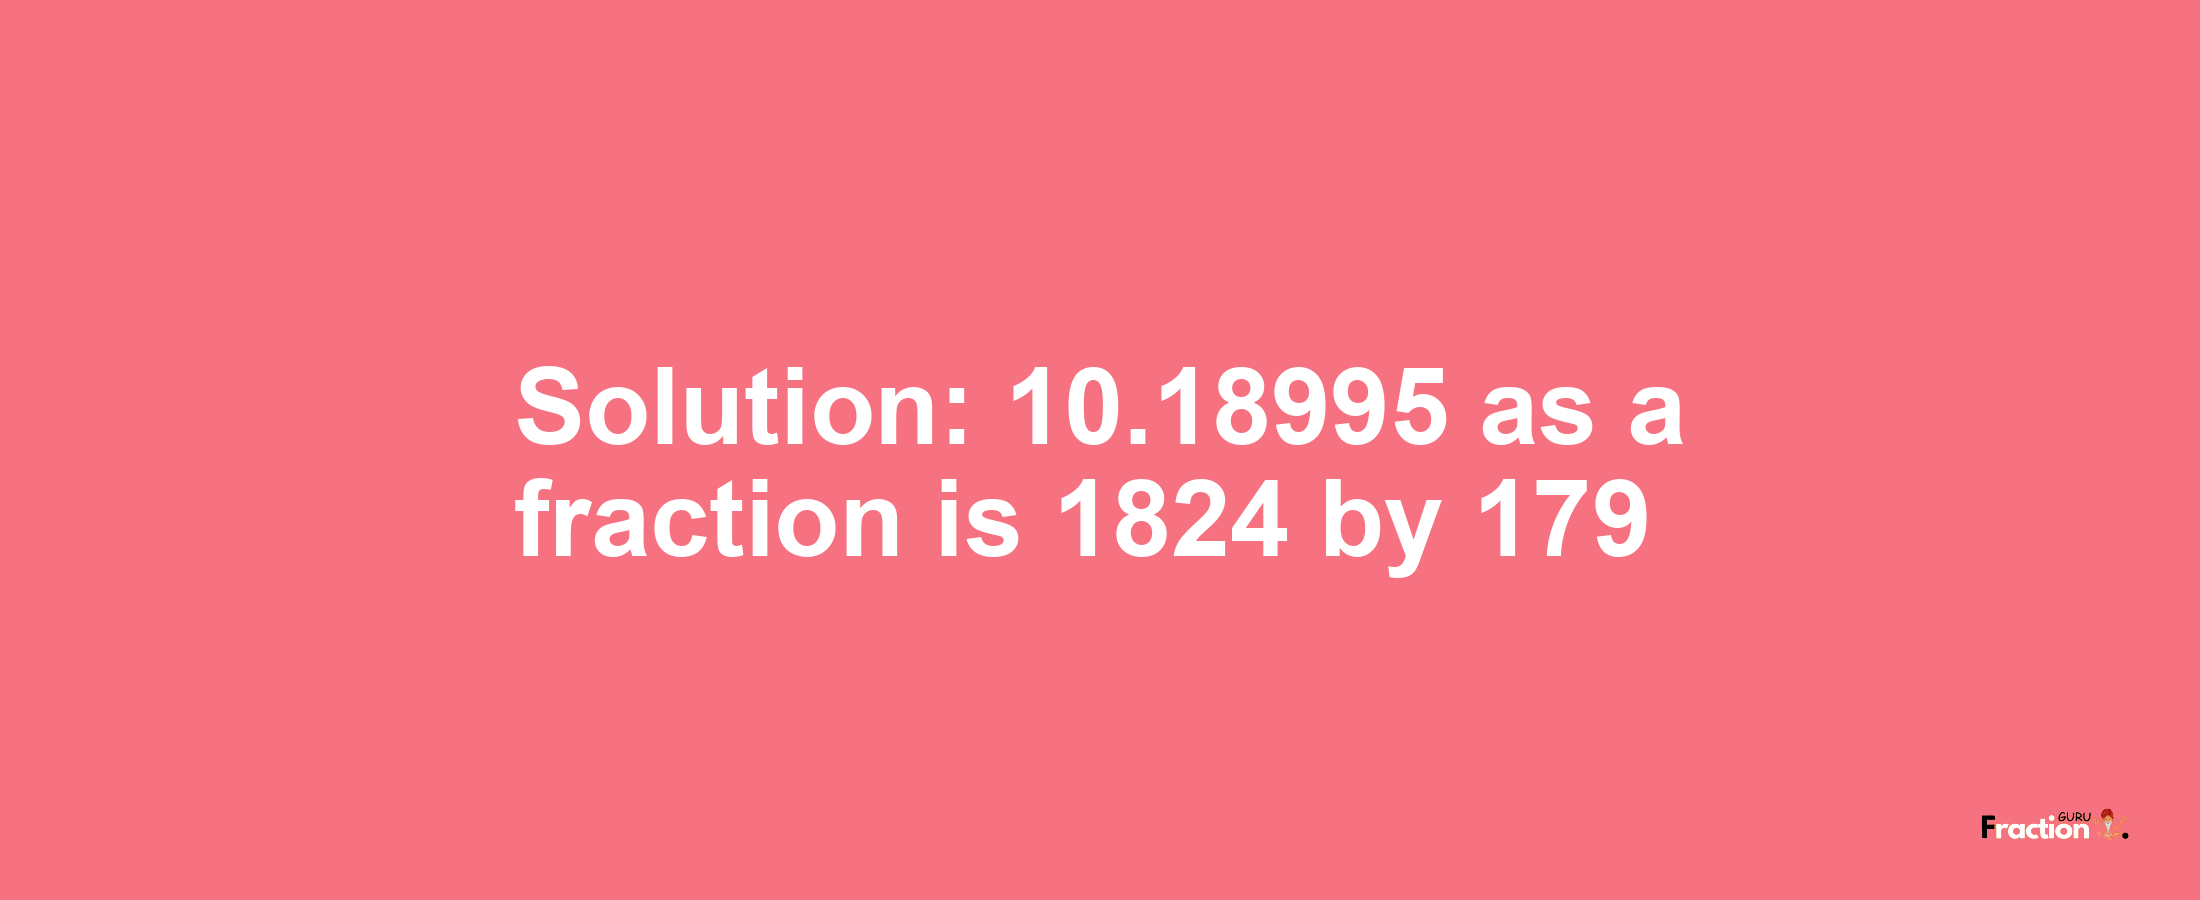 Solution:10.18995 as a fraction is 1824/179